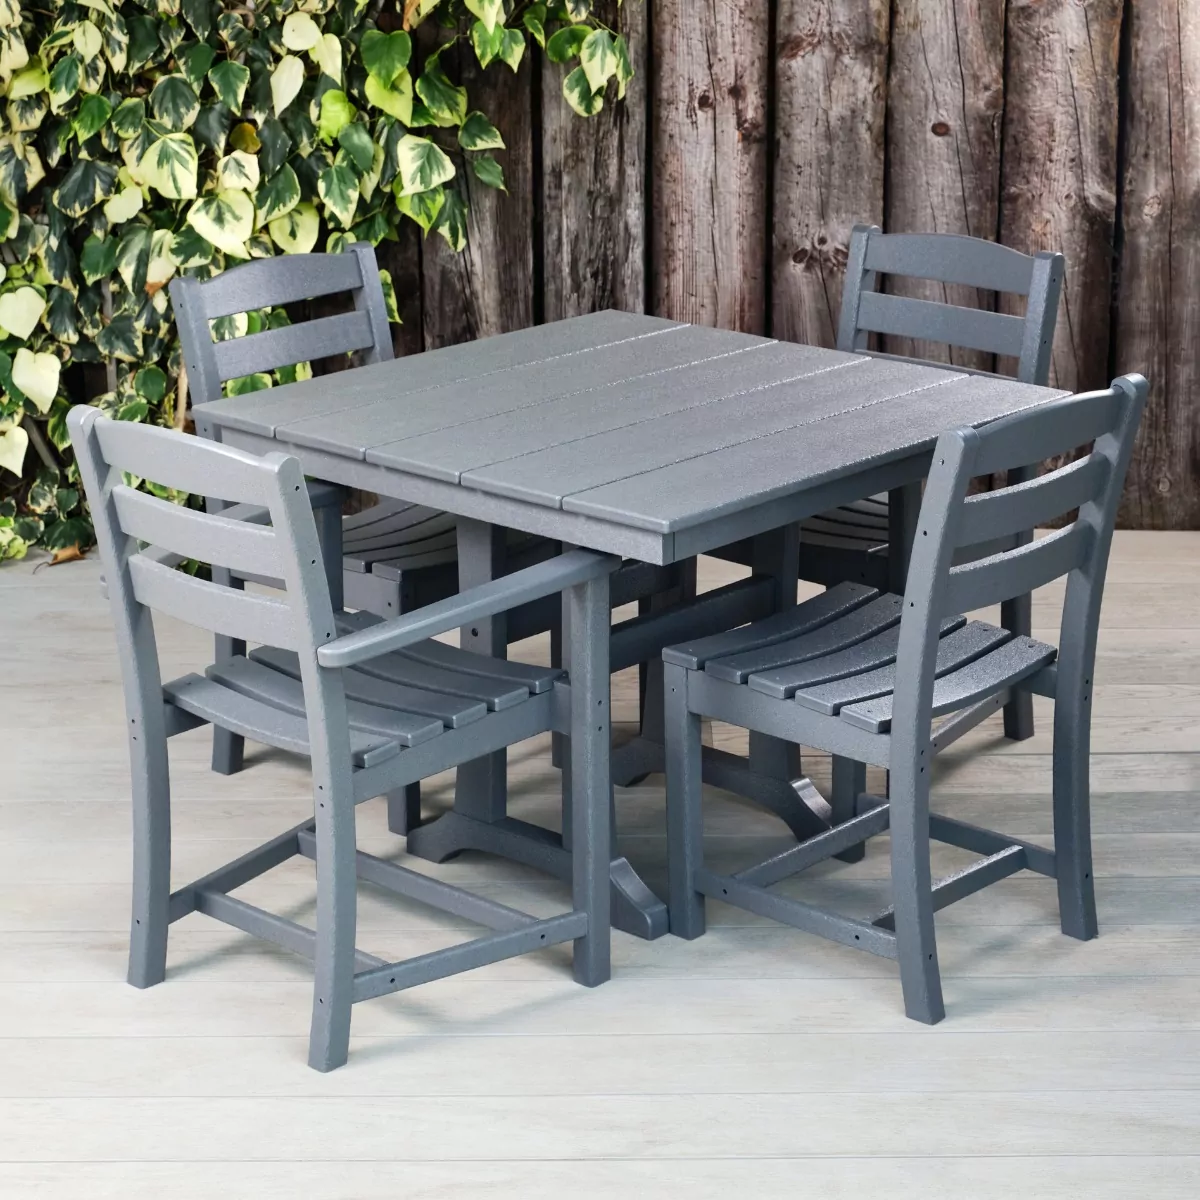 Recycled-Plastic-Square-Outdoor-Table-and-4-Chairs-Grey.jpg